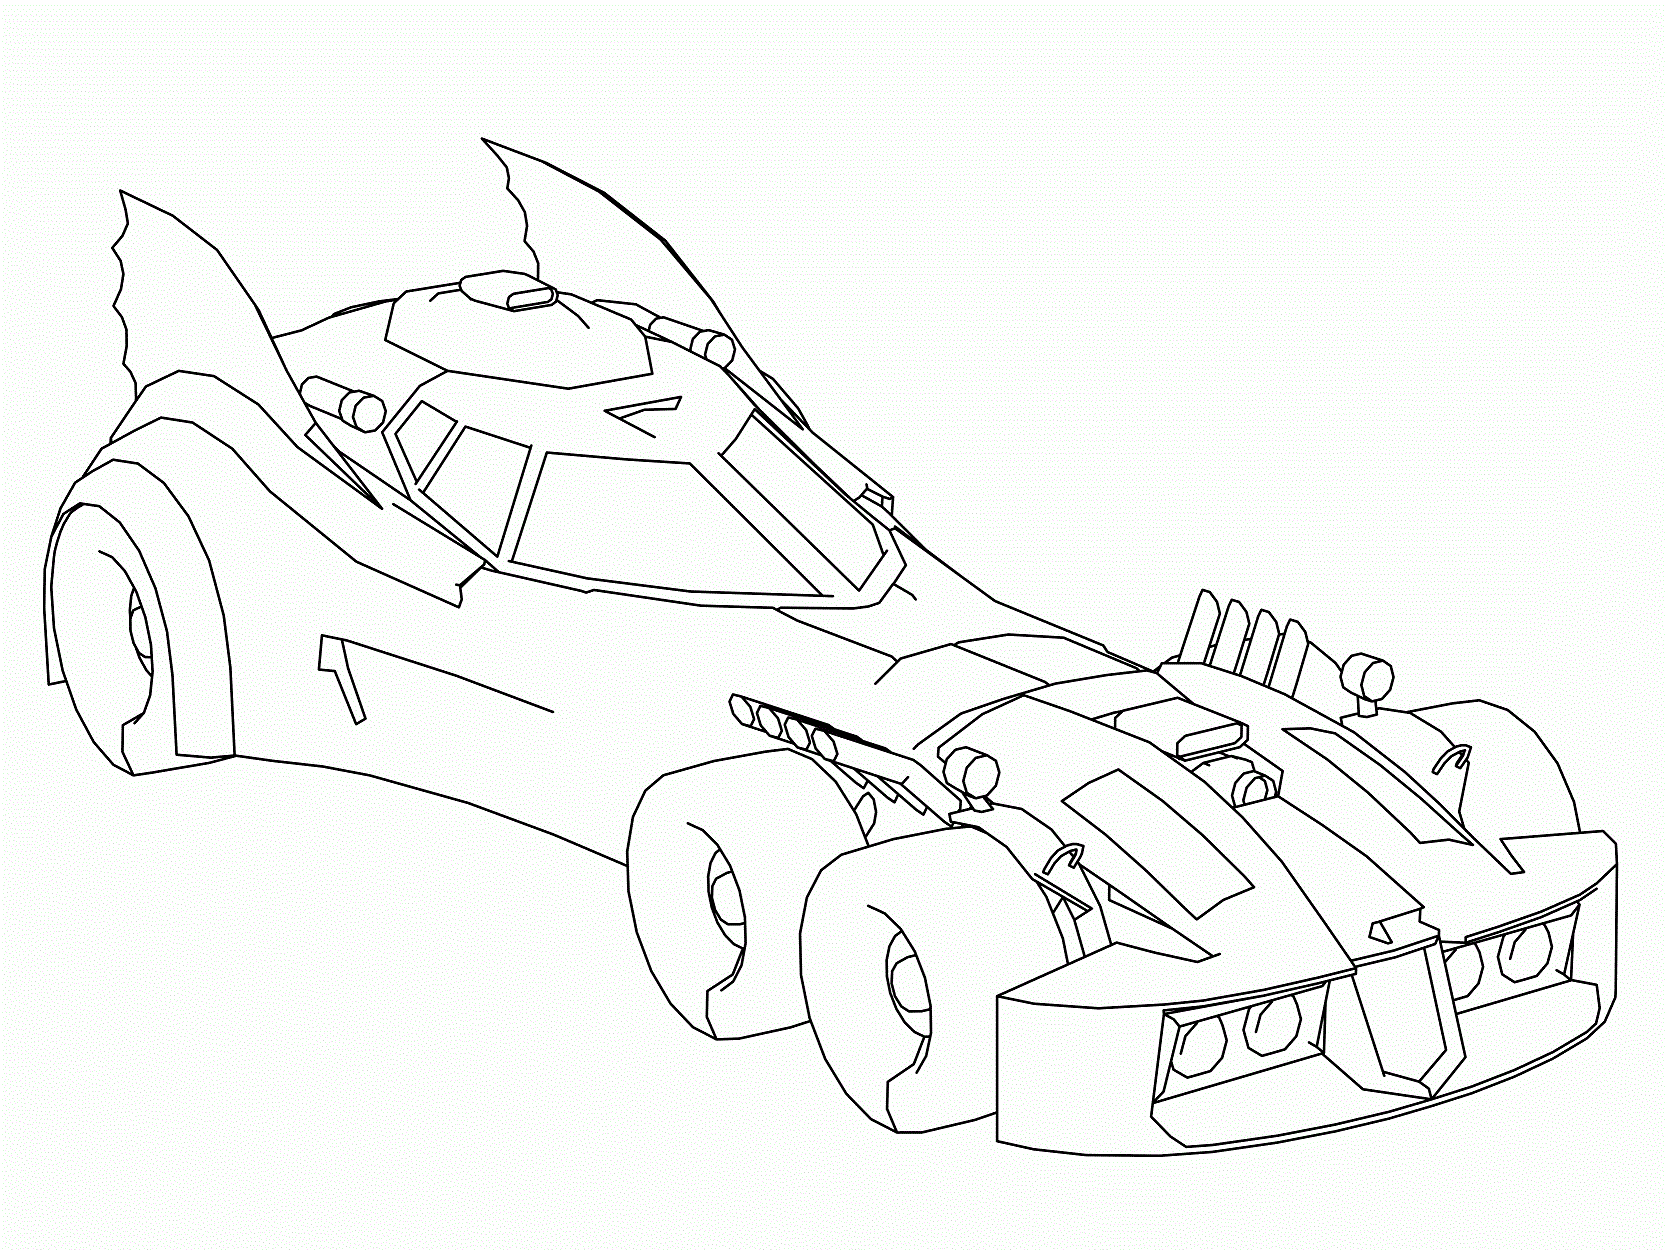 Awesome Batmobile Coloring Page - Free Printable Coloring Pages for Kids